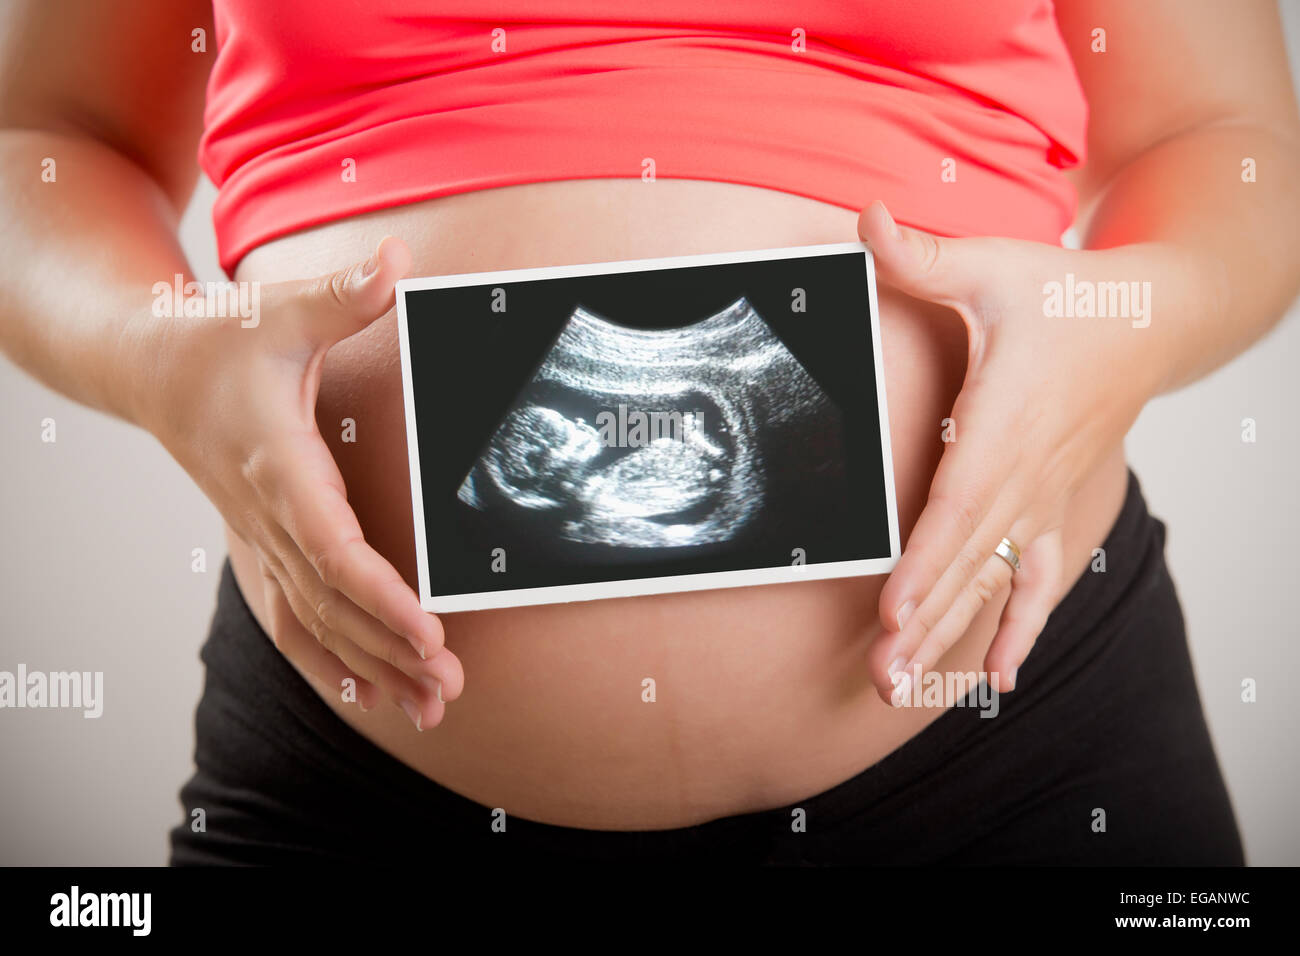 Woman holding an ultrasound scan of her unborn baby Stock Photo